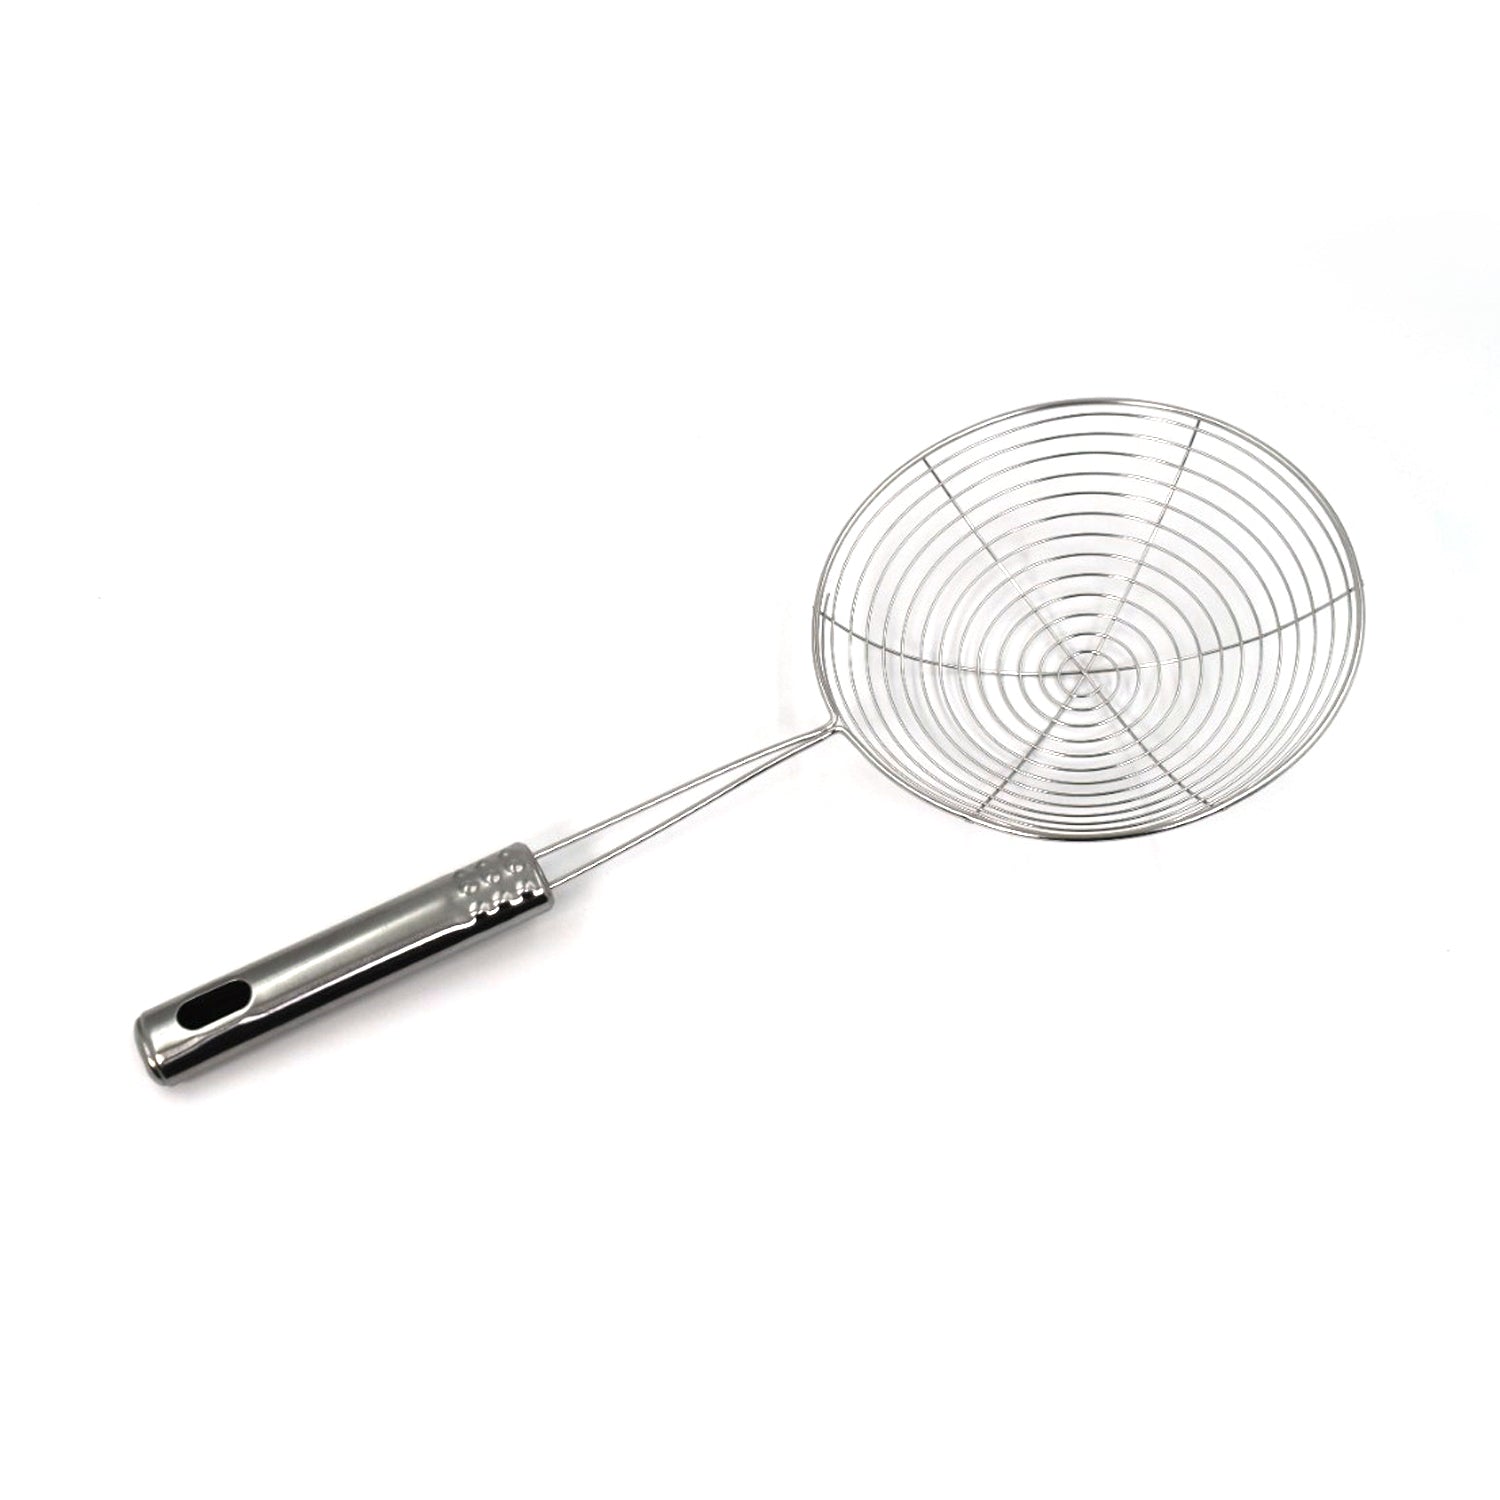 2729 Medium Oil Strainer To Get Perfect Fried Food Stuffs Easily Without Any Problem And Damage. DeoDap